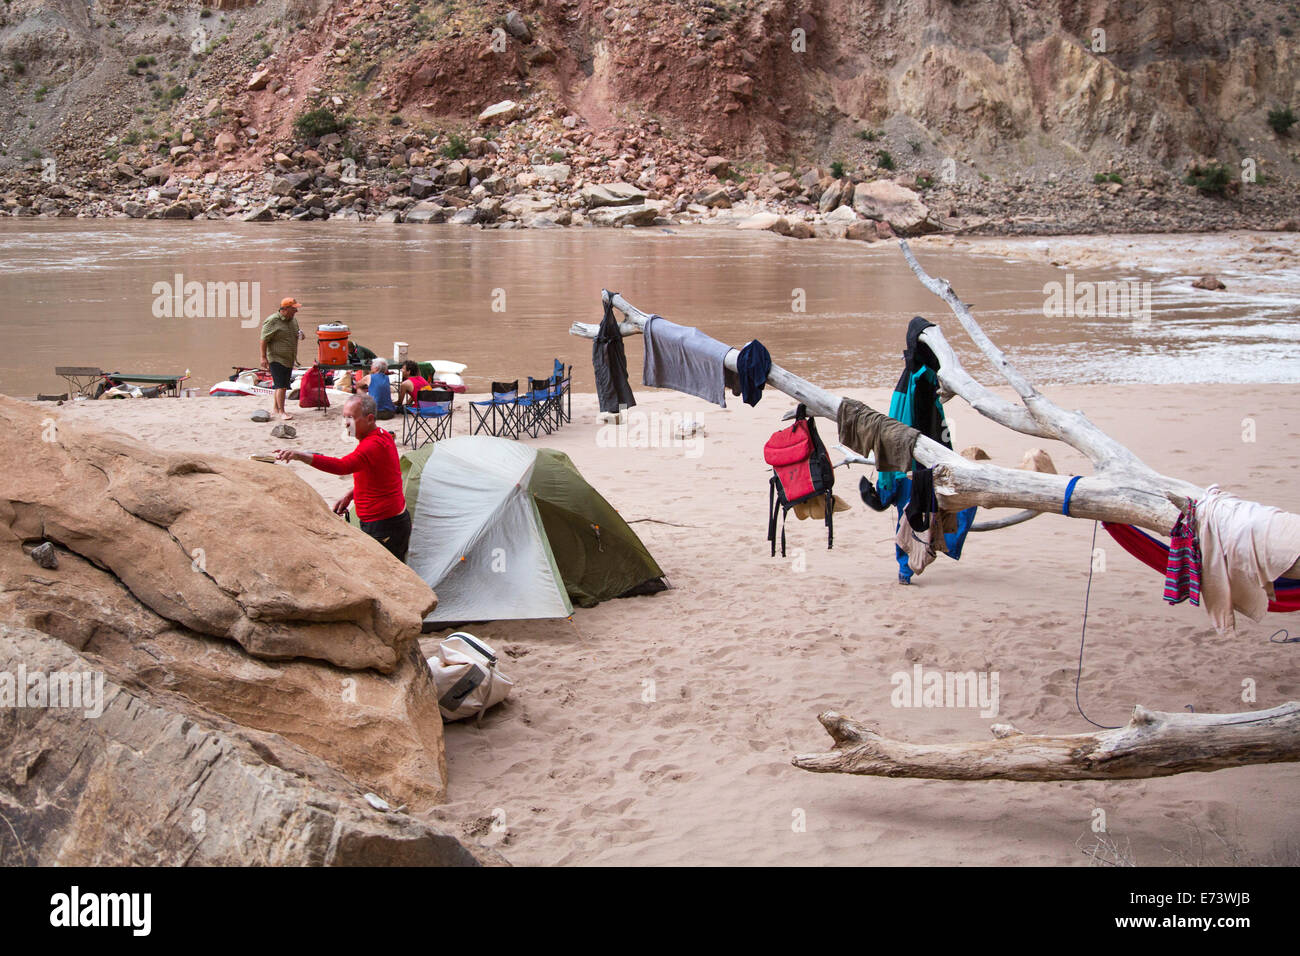 Canyonlands National Park, Utah - Wet clothes hang on a tree to dry during a raft trip on the Colorado River Stock Photo